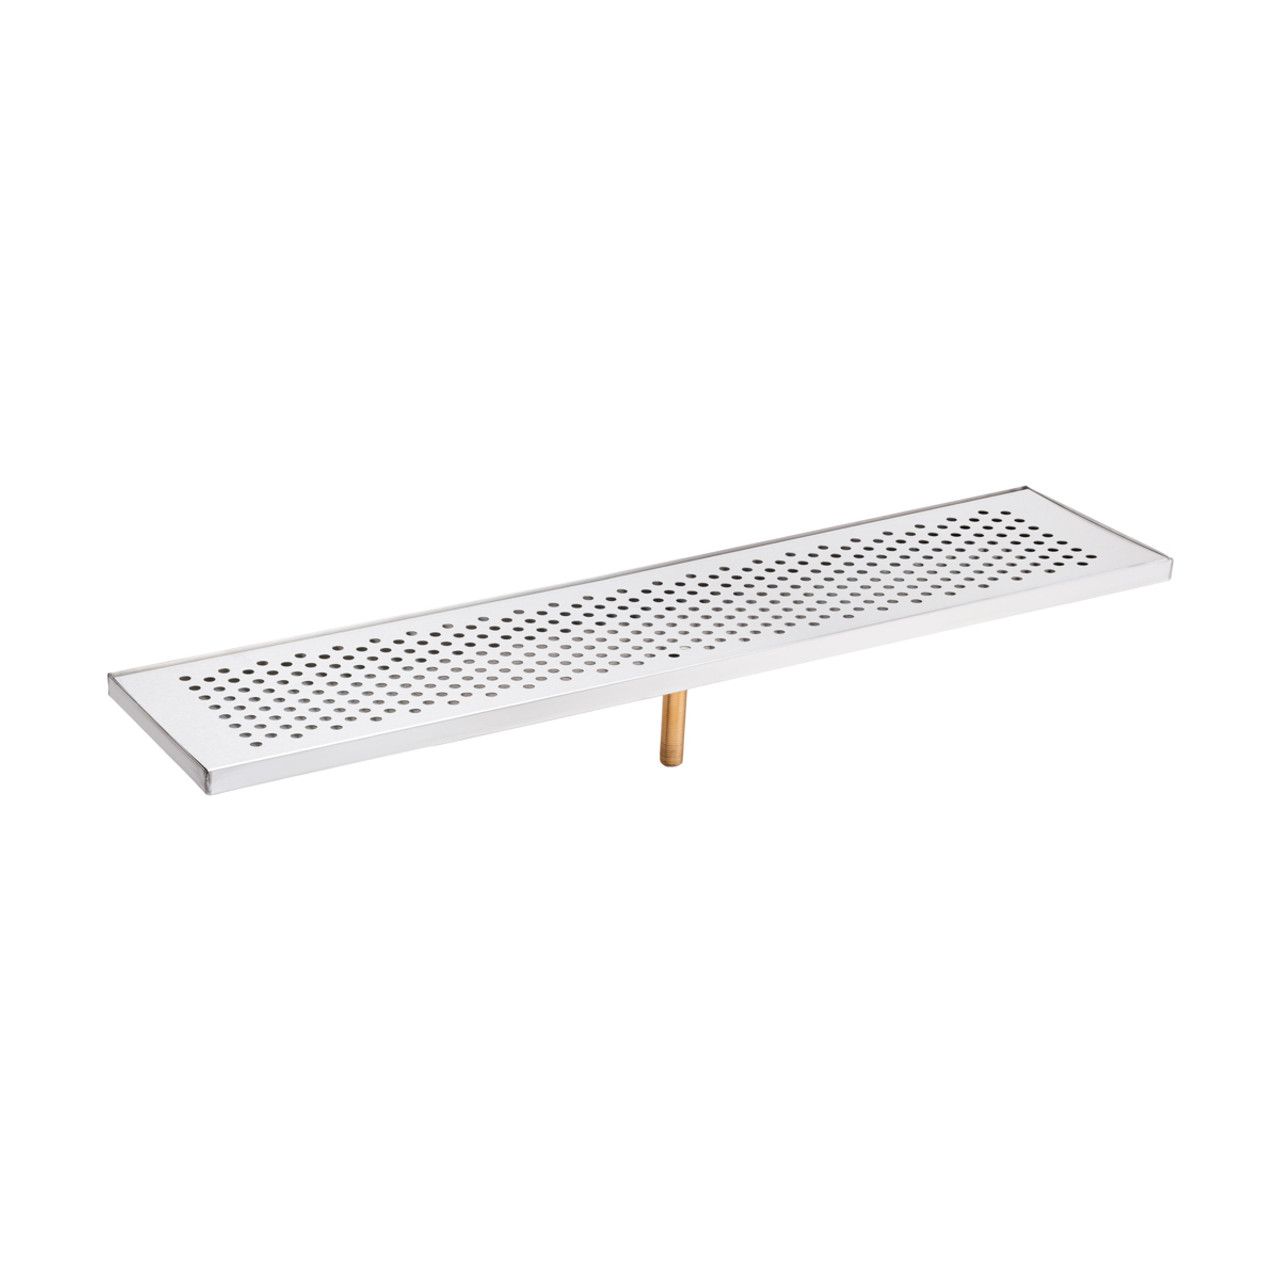 Vertical Tank Drip Tray from Sturdy Products